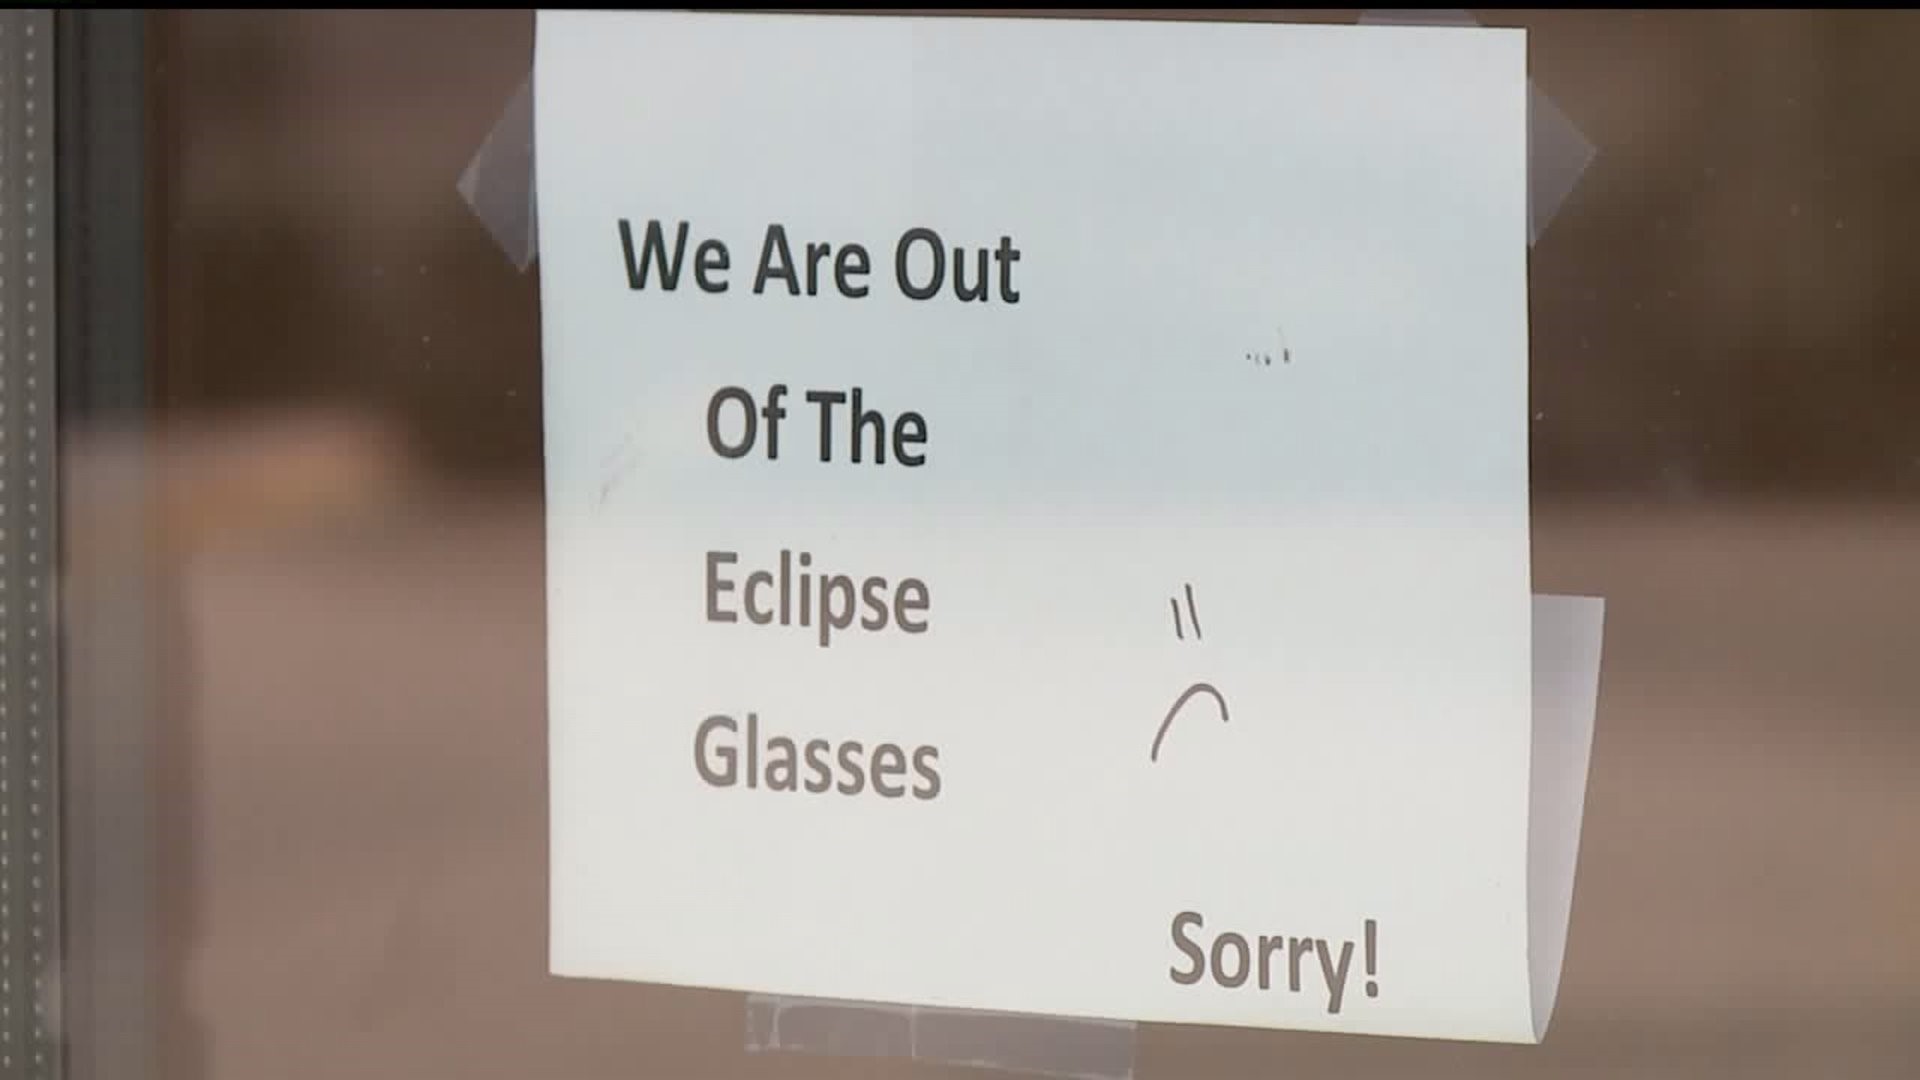 Out of Eclipse Glasses